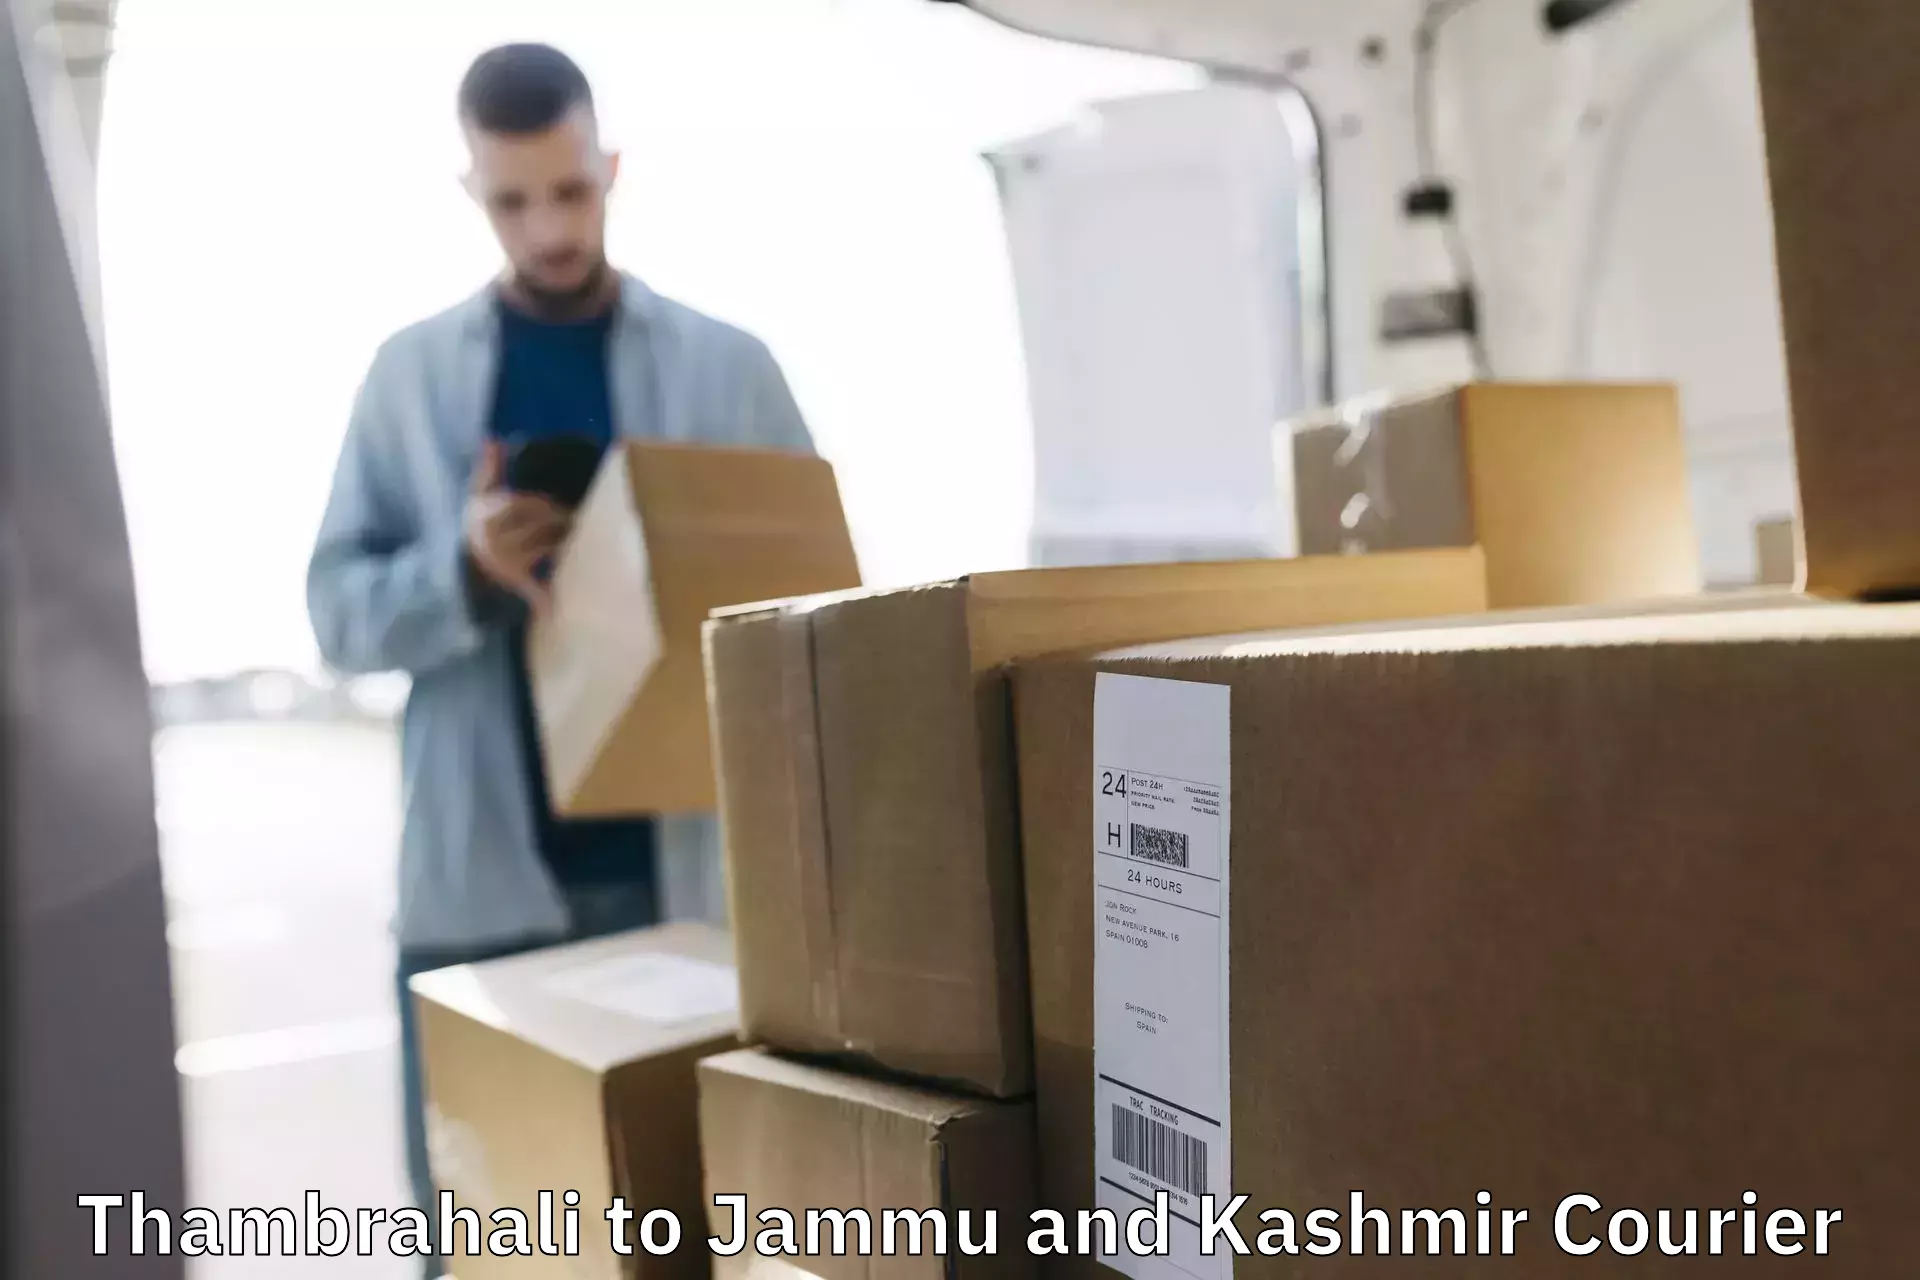 Courier rate comparison Thambrahali to Jammu and Kashmir